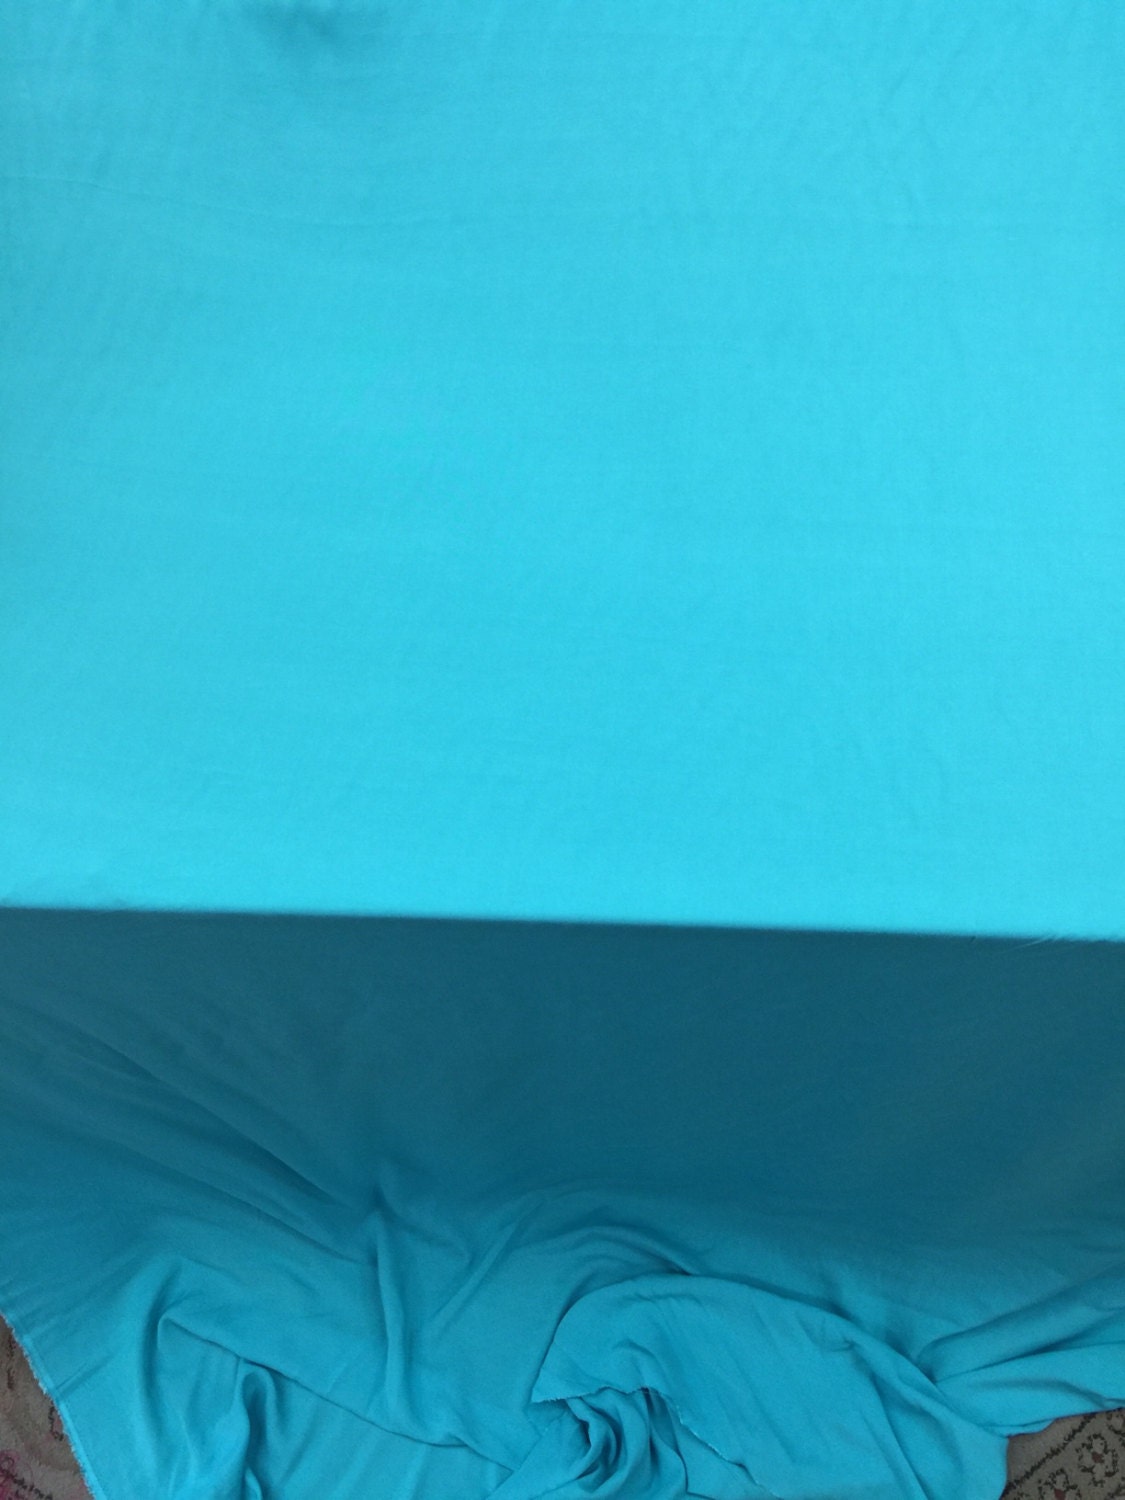 100% Rayon Challis Caribbean Turquoise Fabric Sold by the Yard Clothing Dress Decoration Organic